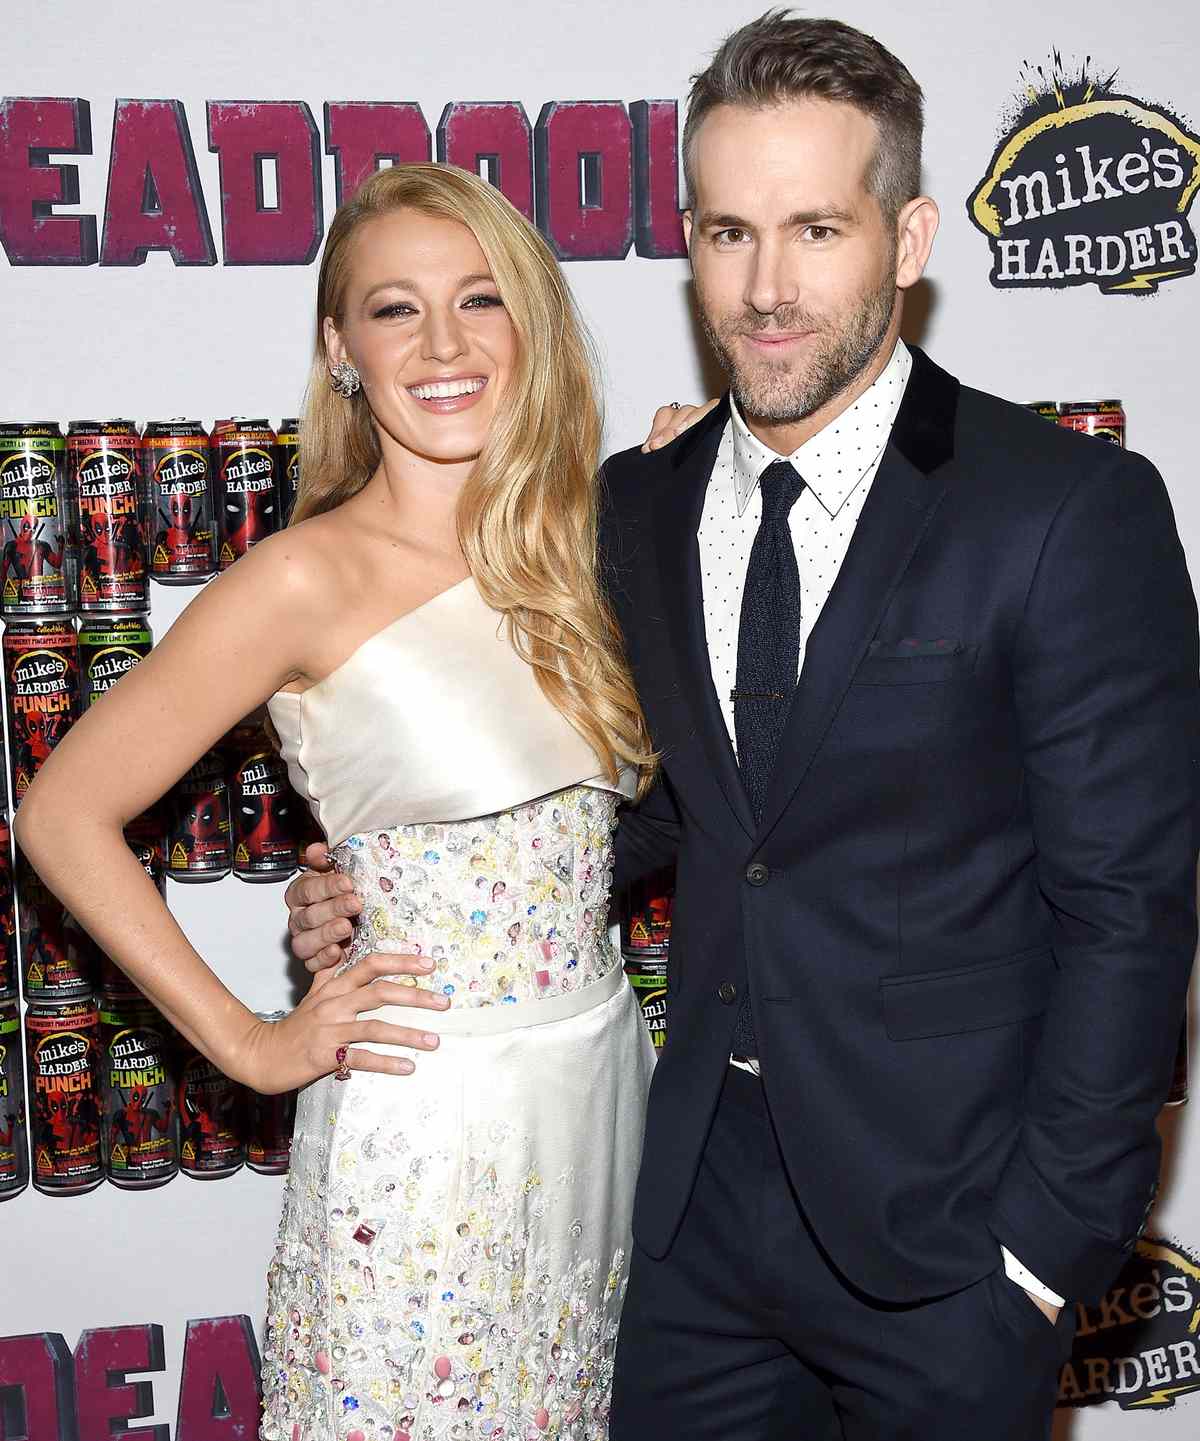 Actors Blake Lively (L) and Ryan Reynolds attend the 'Deadpool' fan event at AMC Empire Theatre on February 8, 2016 in New York City.